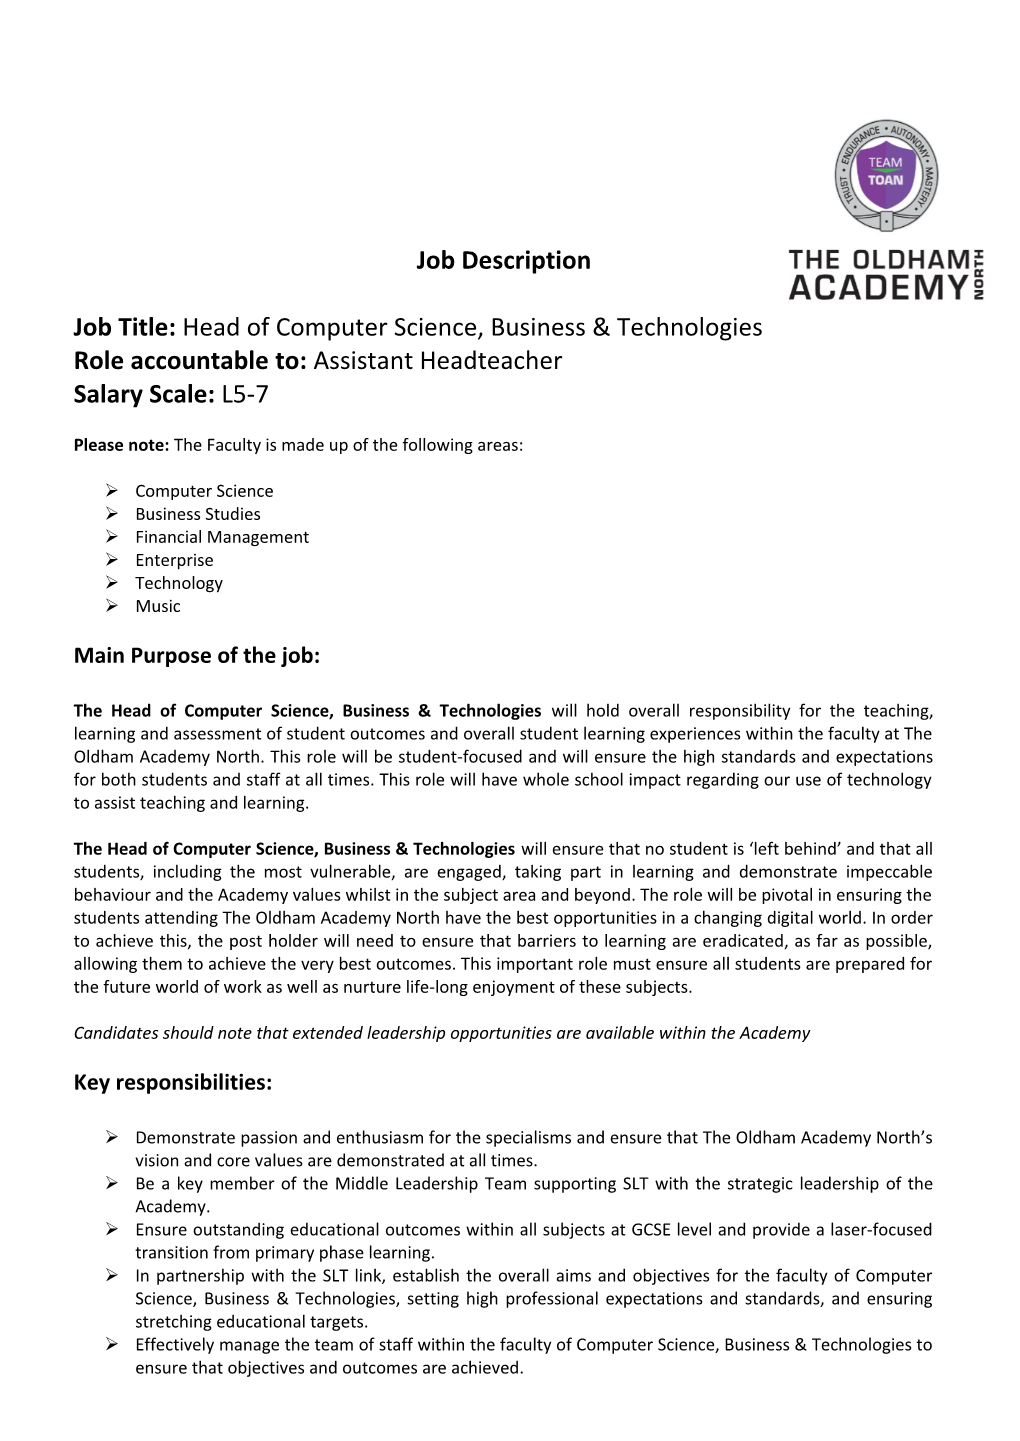 Job Title: Head of Computer Science, Business & Technologies